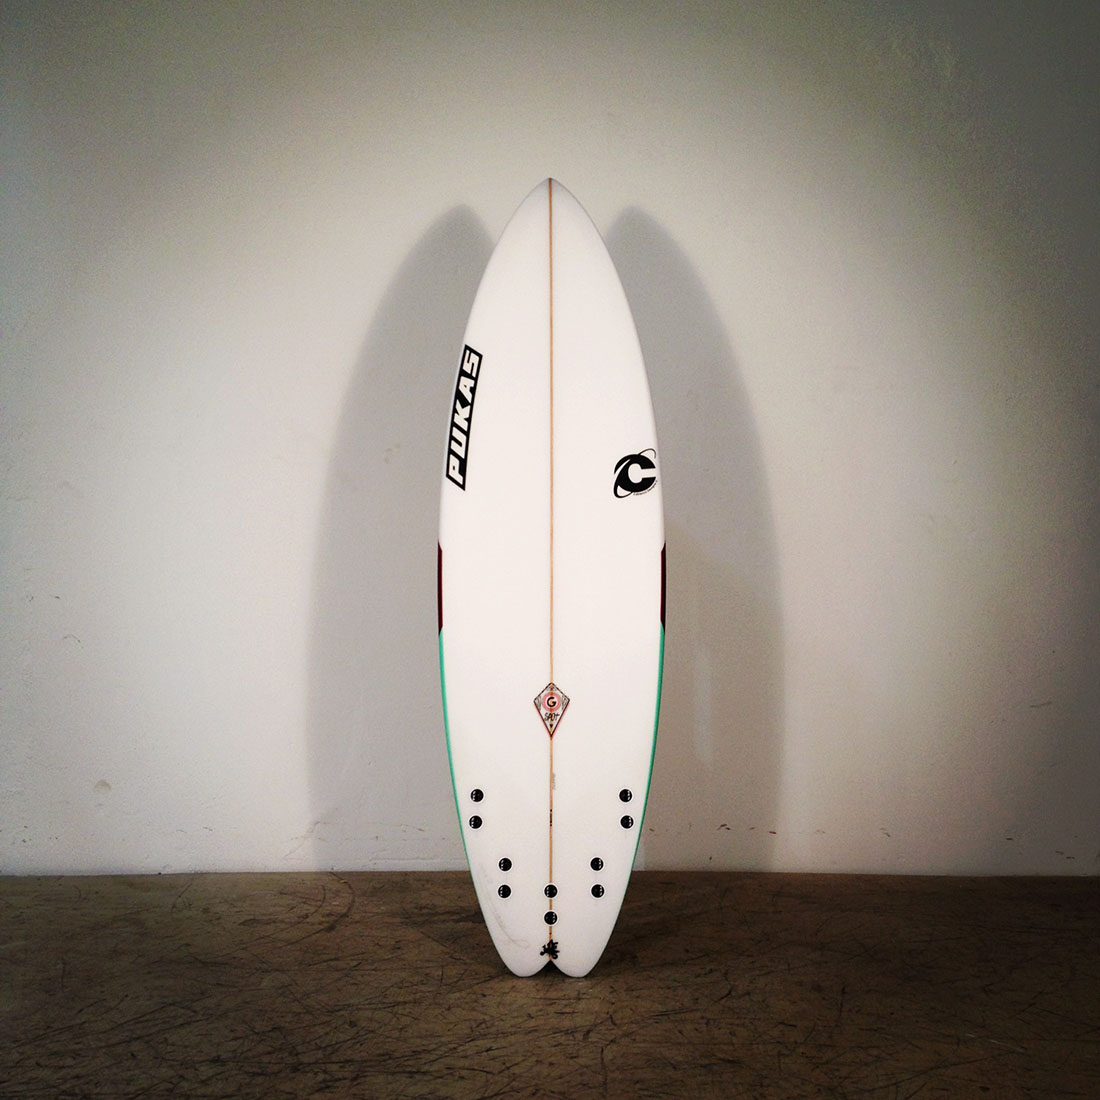 Pukas Surf Surfboards GSpot shaped by Johnny Cabianca